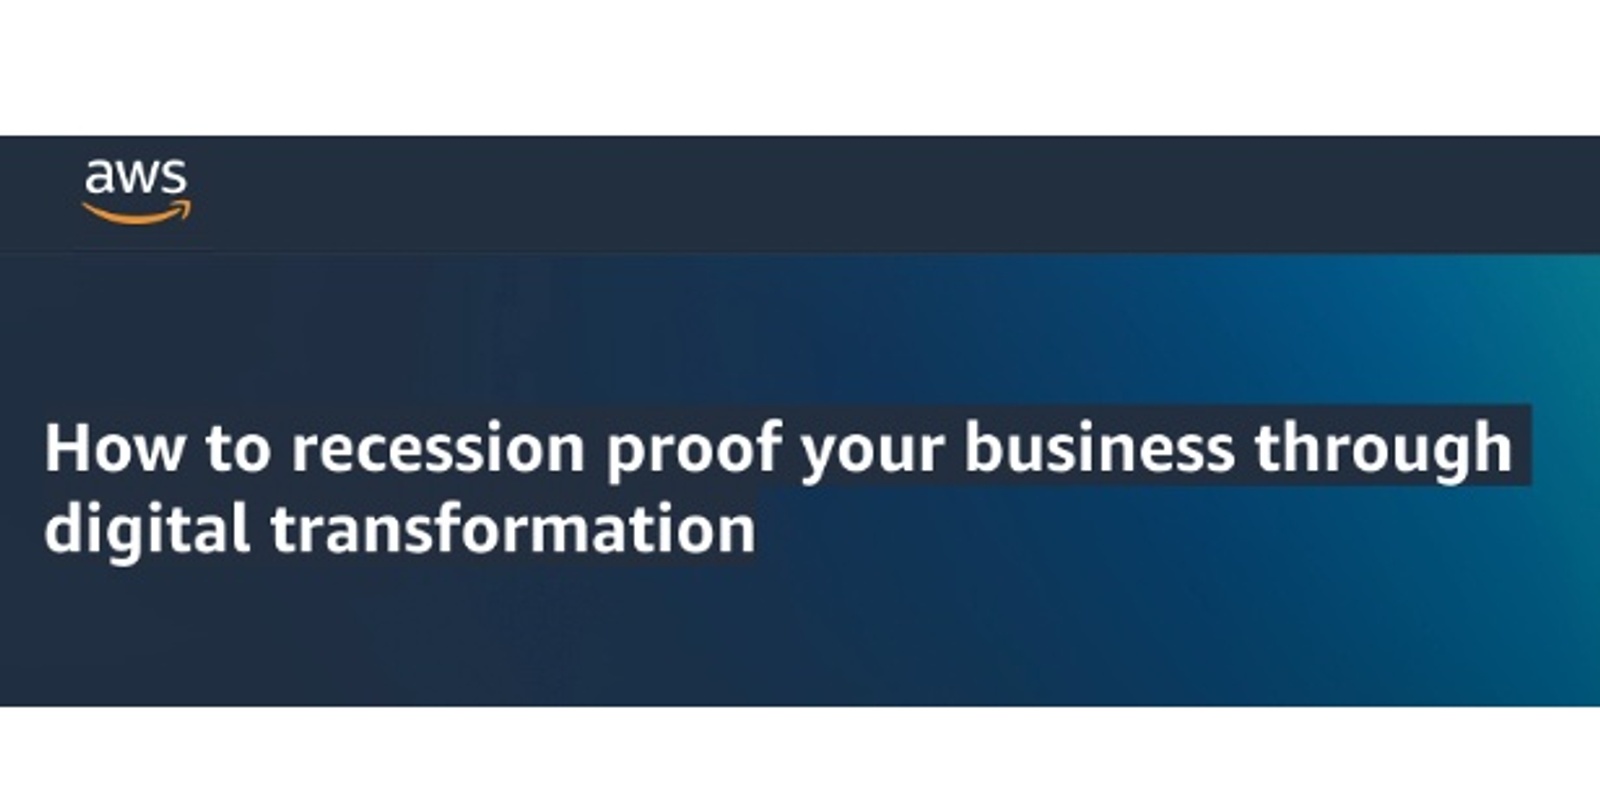 Banner image for How to recession proof your business through digital transformation